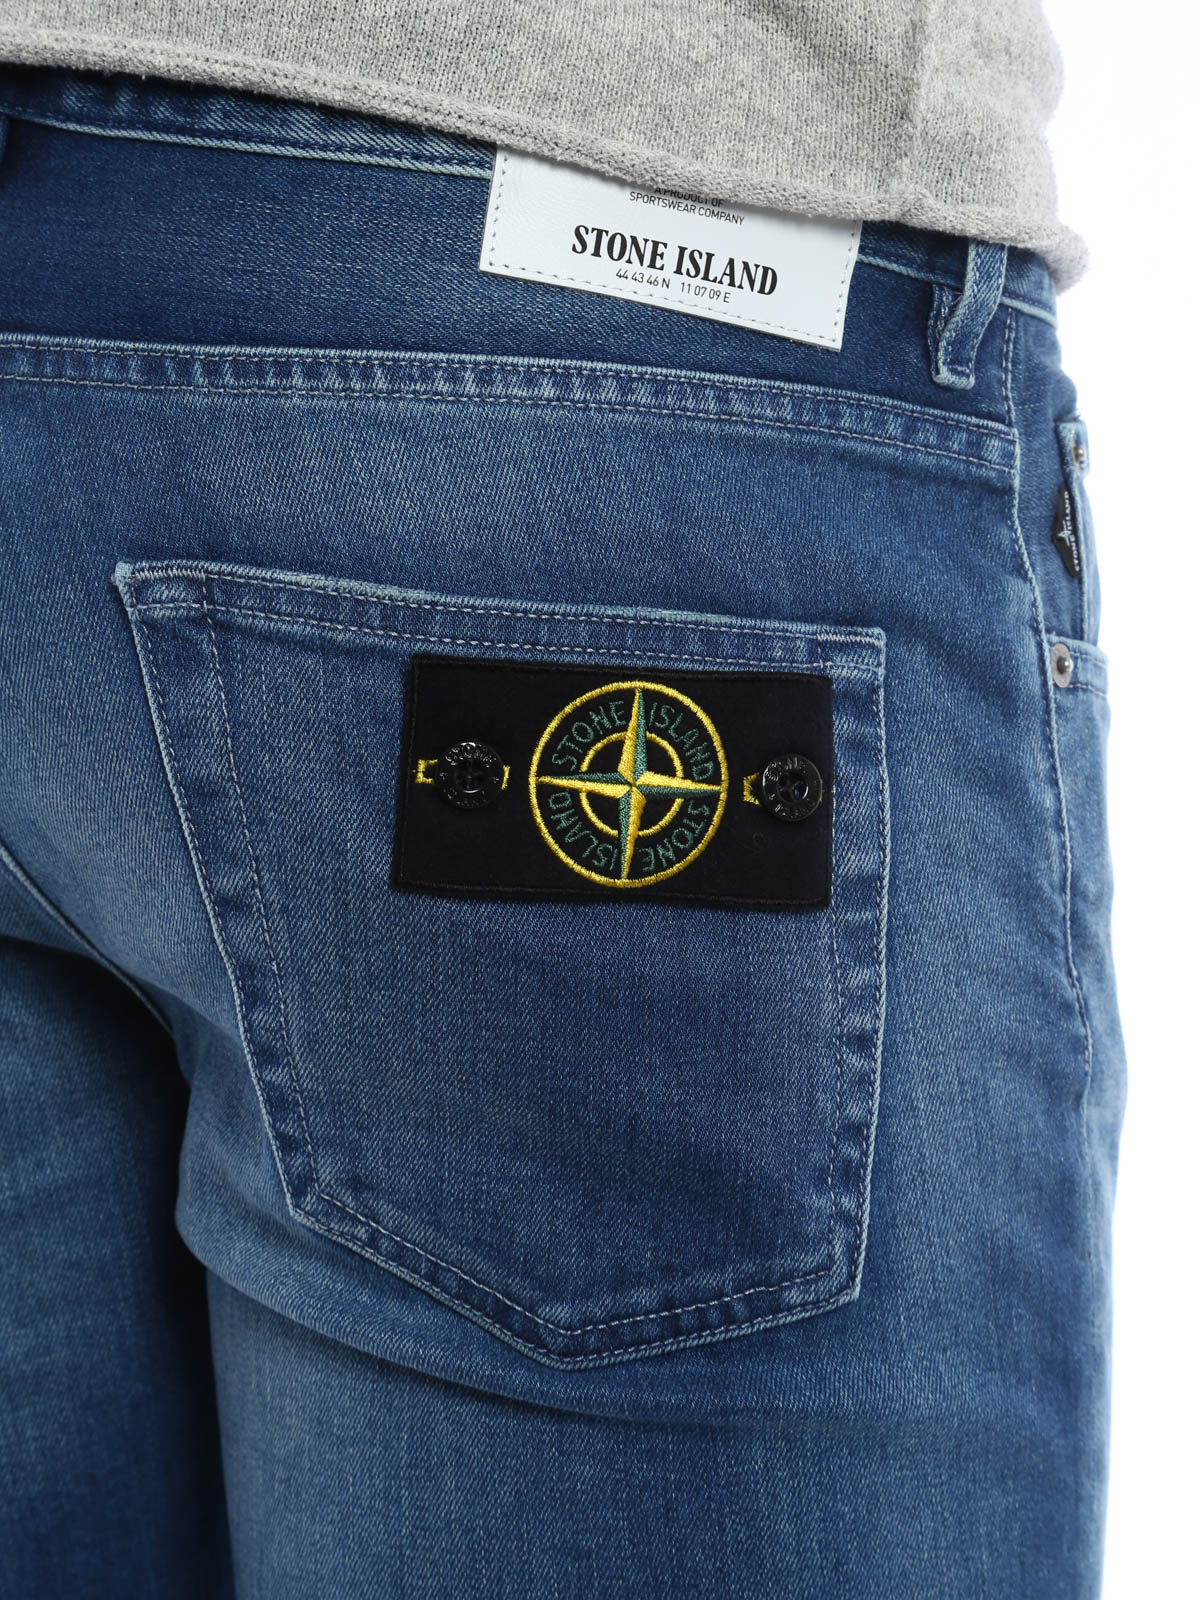 stone island ripped jeans